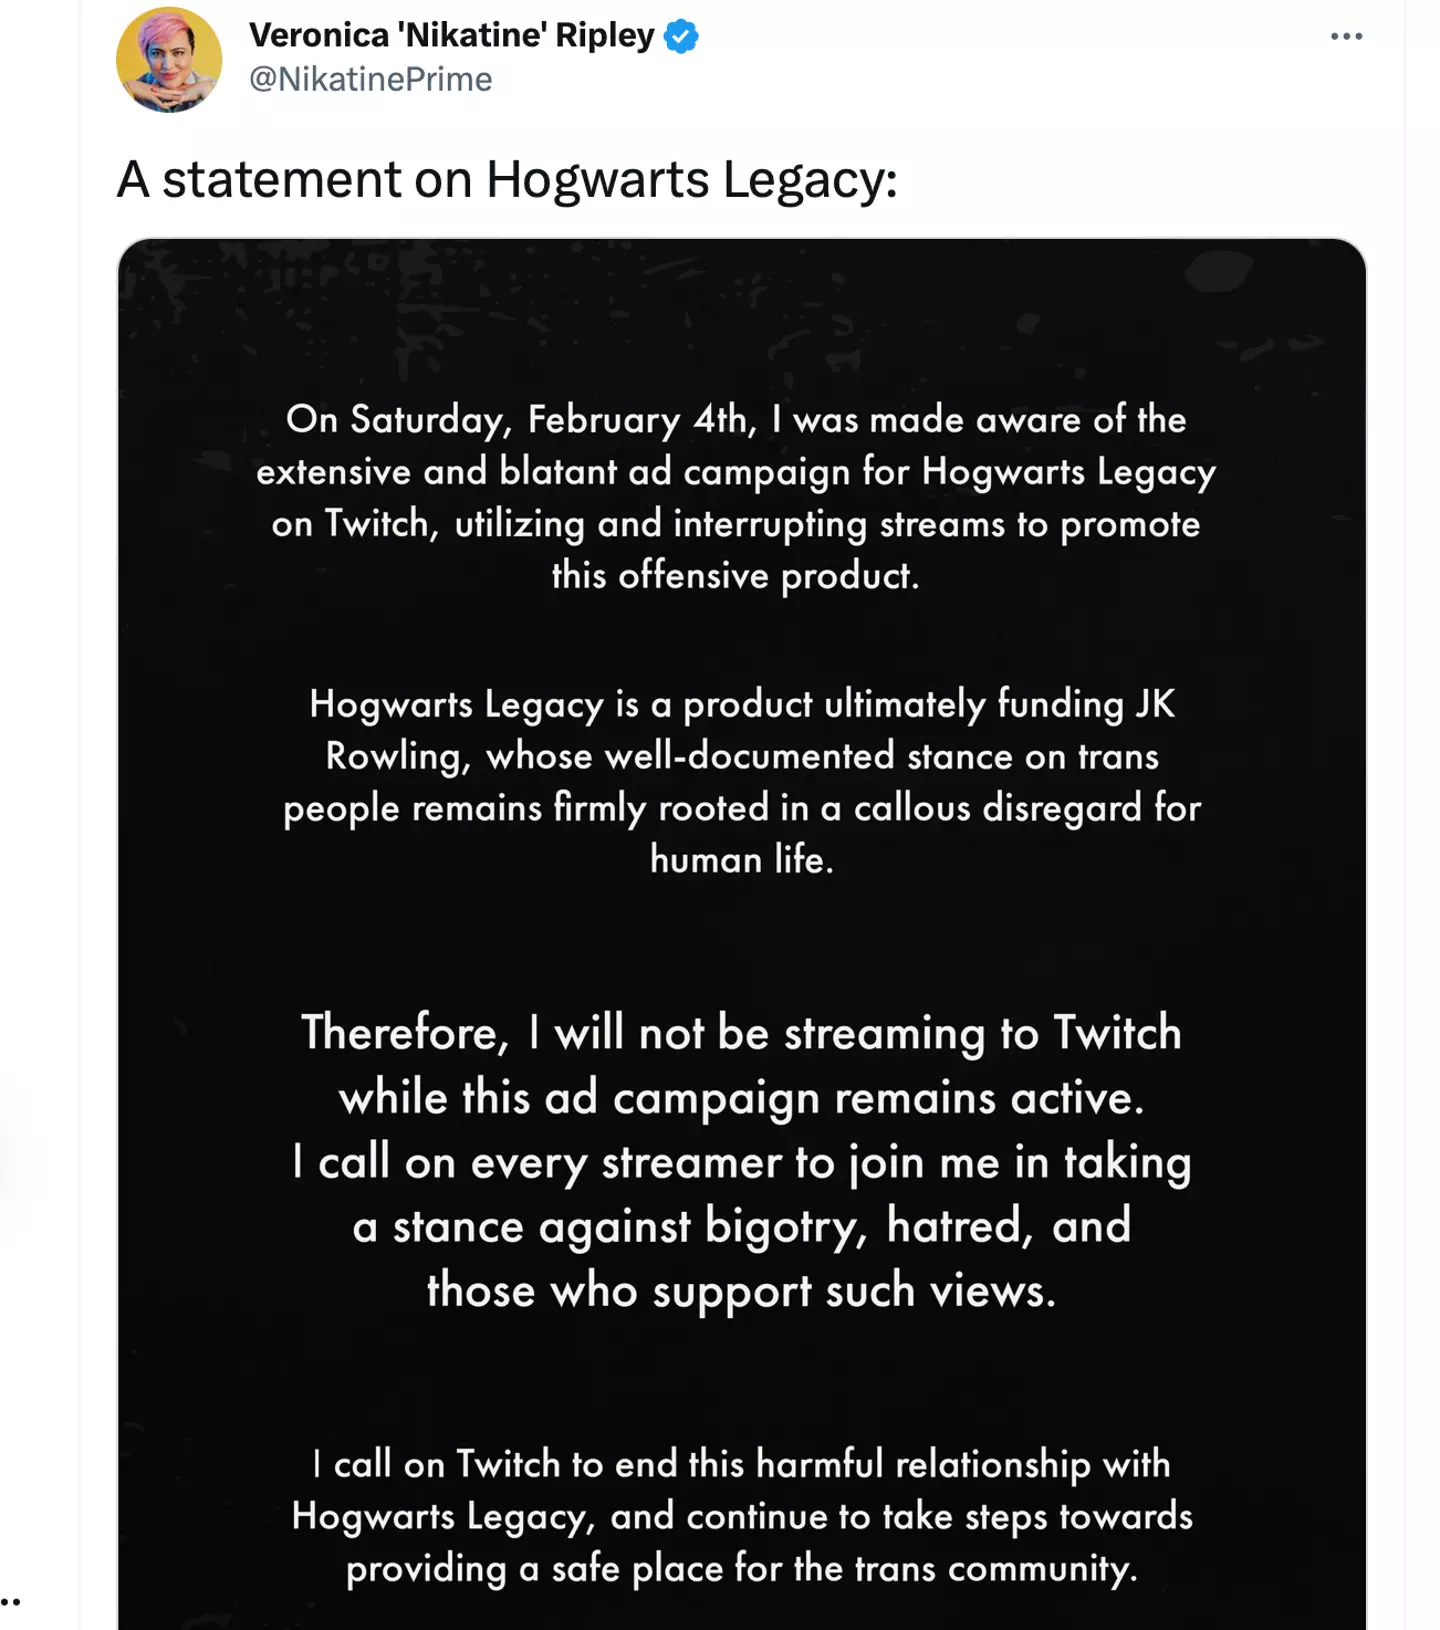 Many fans have called for a boycott of Hogwarts Legacy.